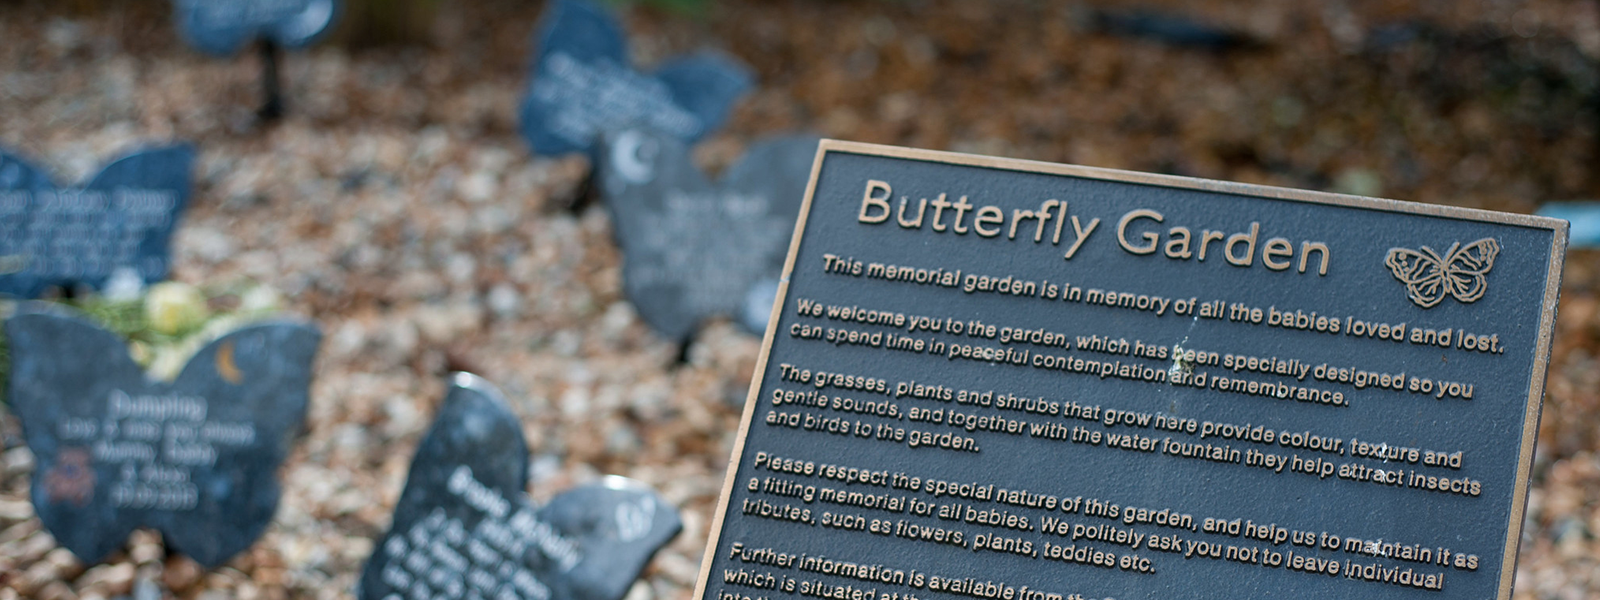 the Butterfly Garden welcome sign